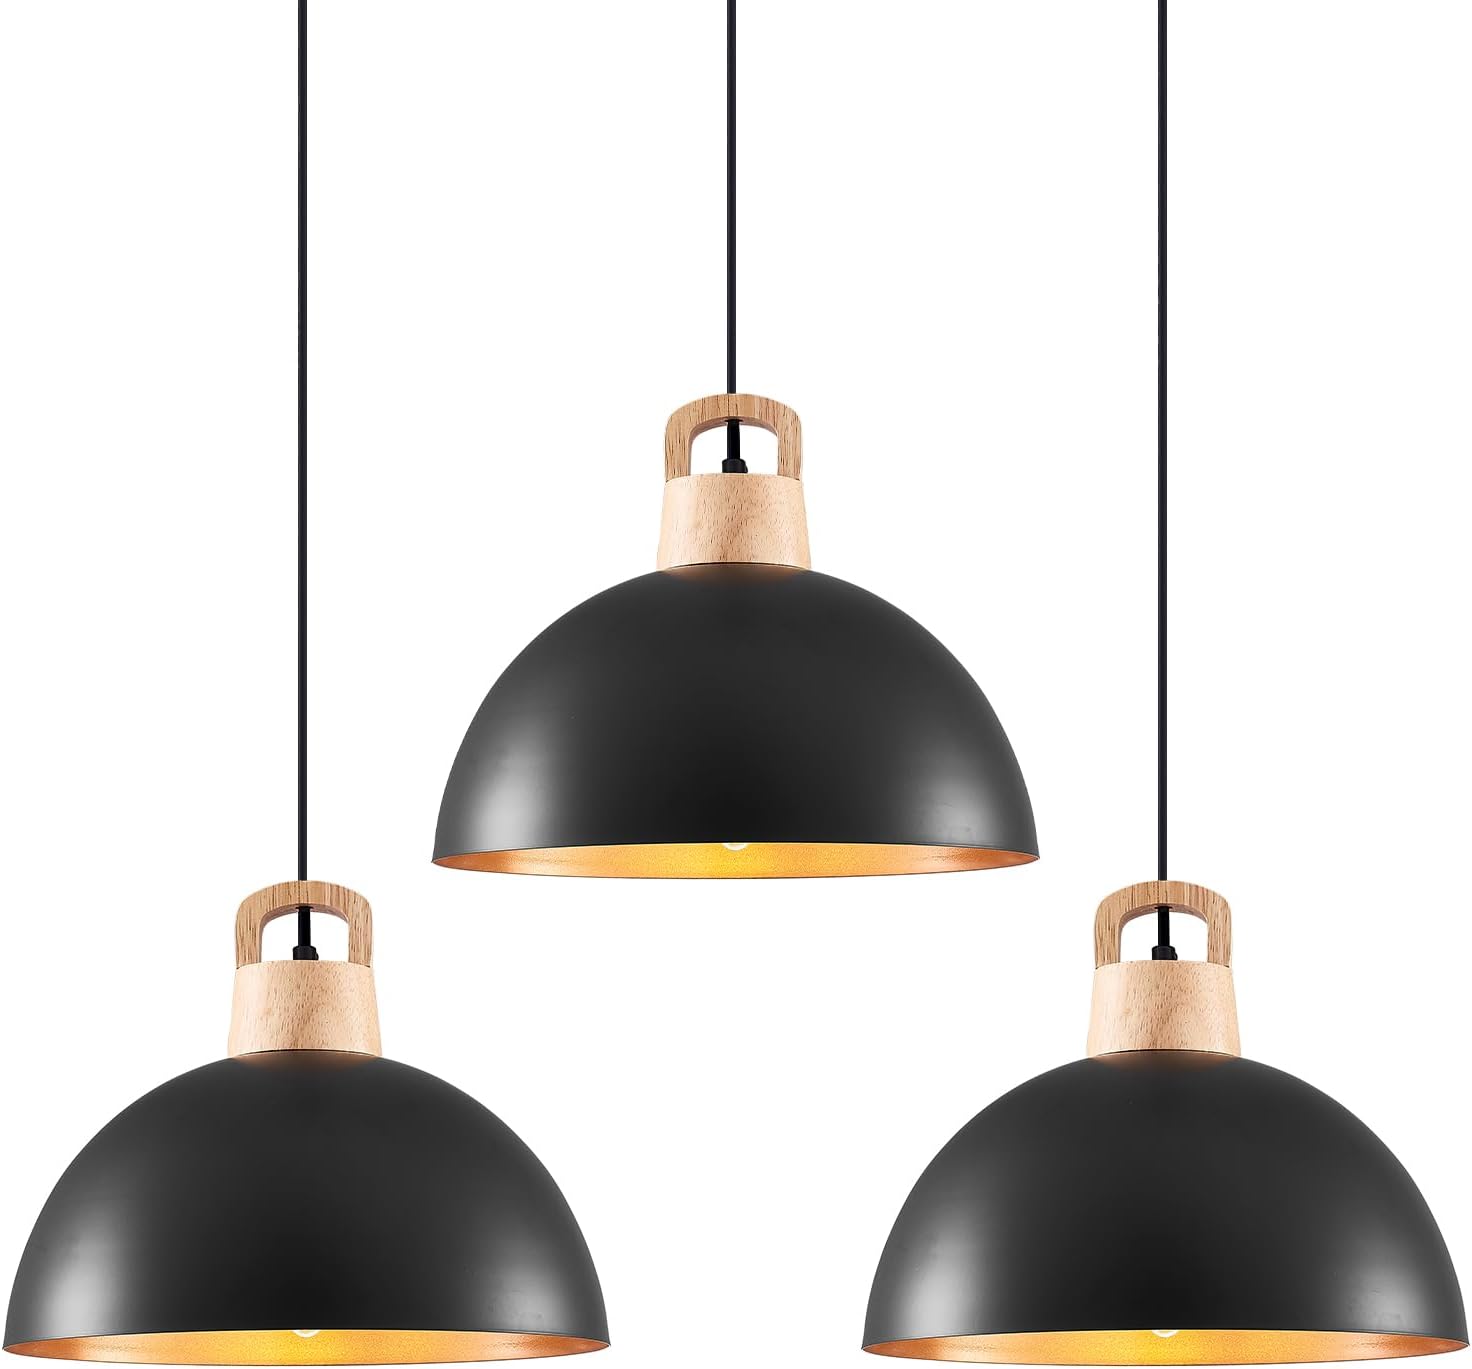 I was looking for hanging kitchen lights at a light store by my house, 200 to 300 dollars minimum. Saw these which look better than anything I could find at that store. Easy to install great quality for the price. Found nothing wrong with them. Buy them if you like the way they look you wont be disappointed.